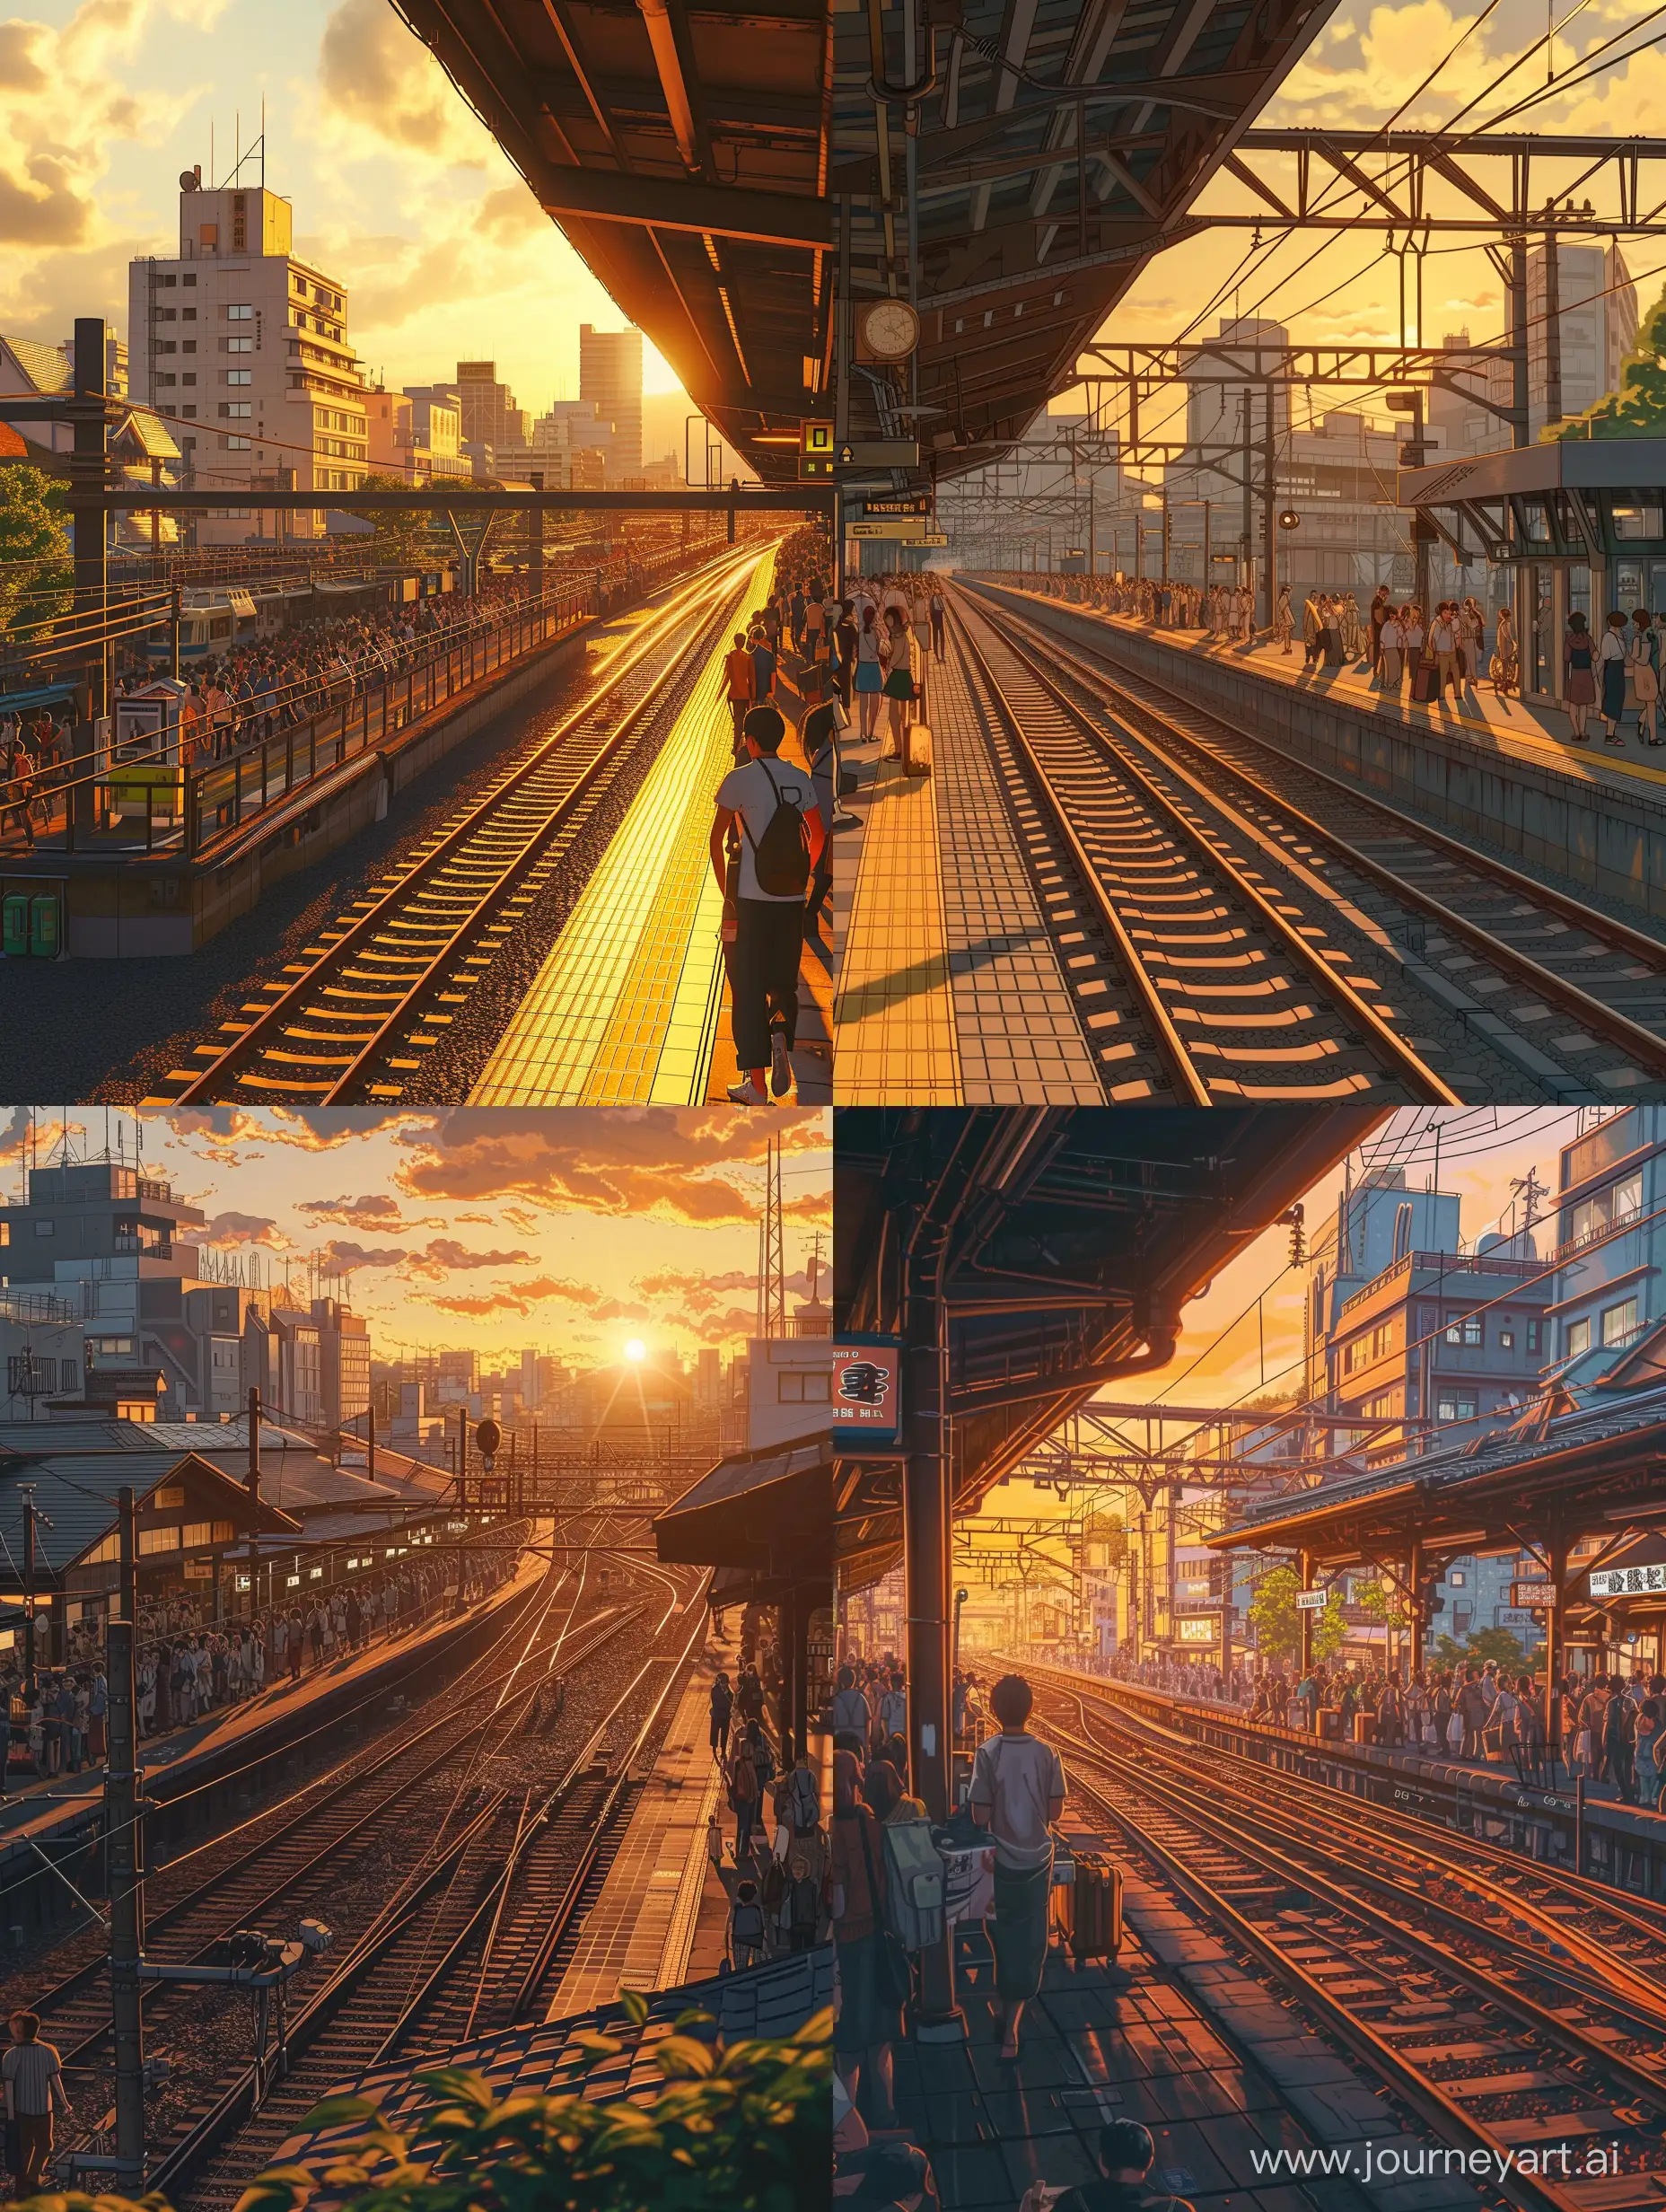 Cityscape-Bustling-Japanese-Train-Station-at-Golden-Hour-Studio-Ghibli-Style